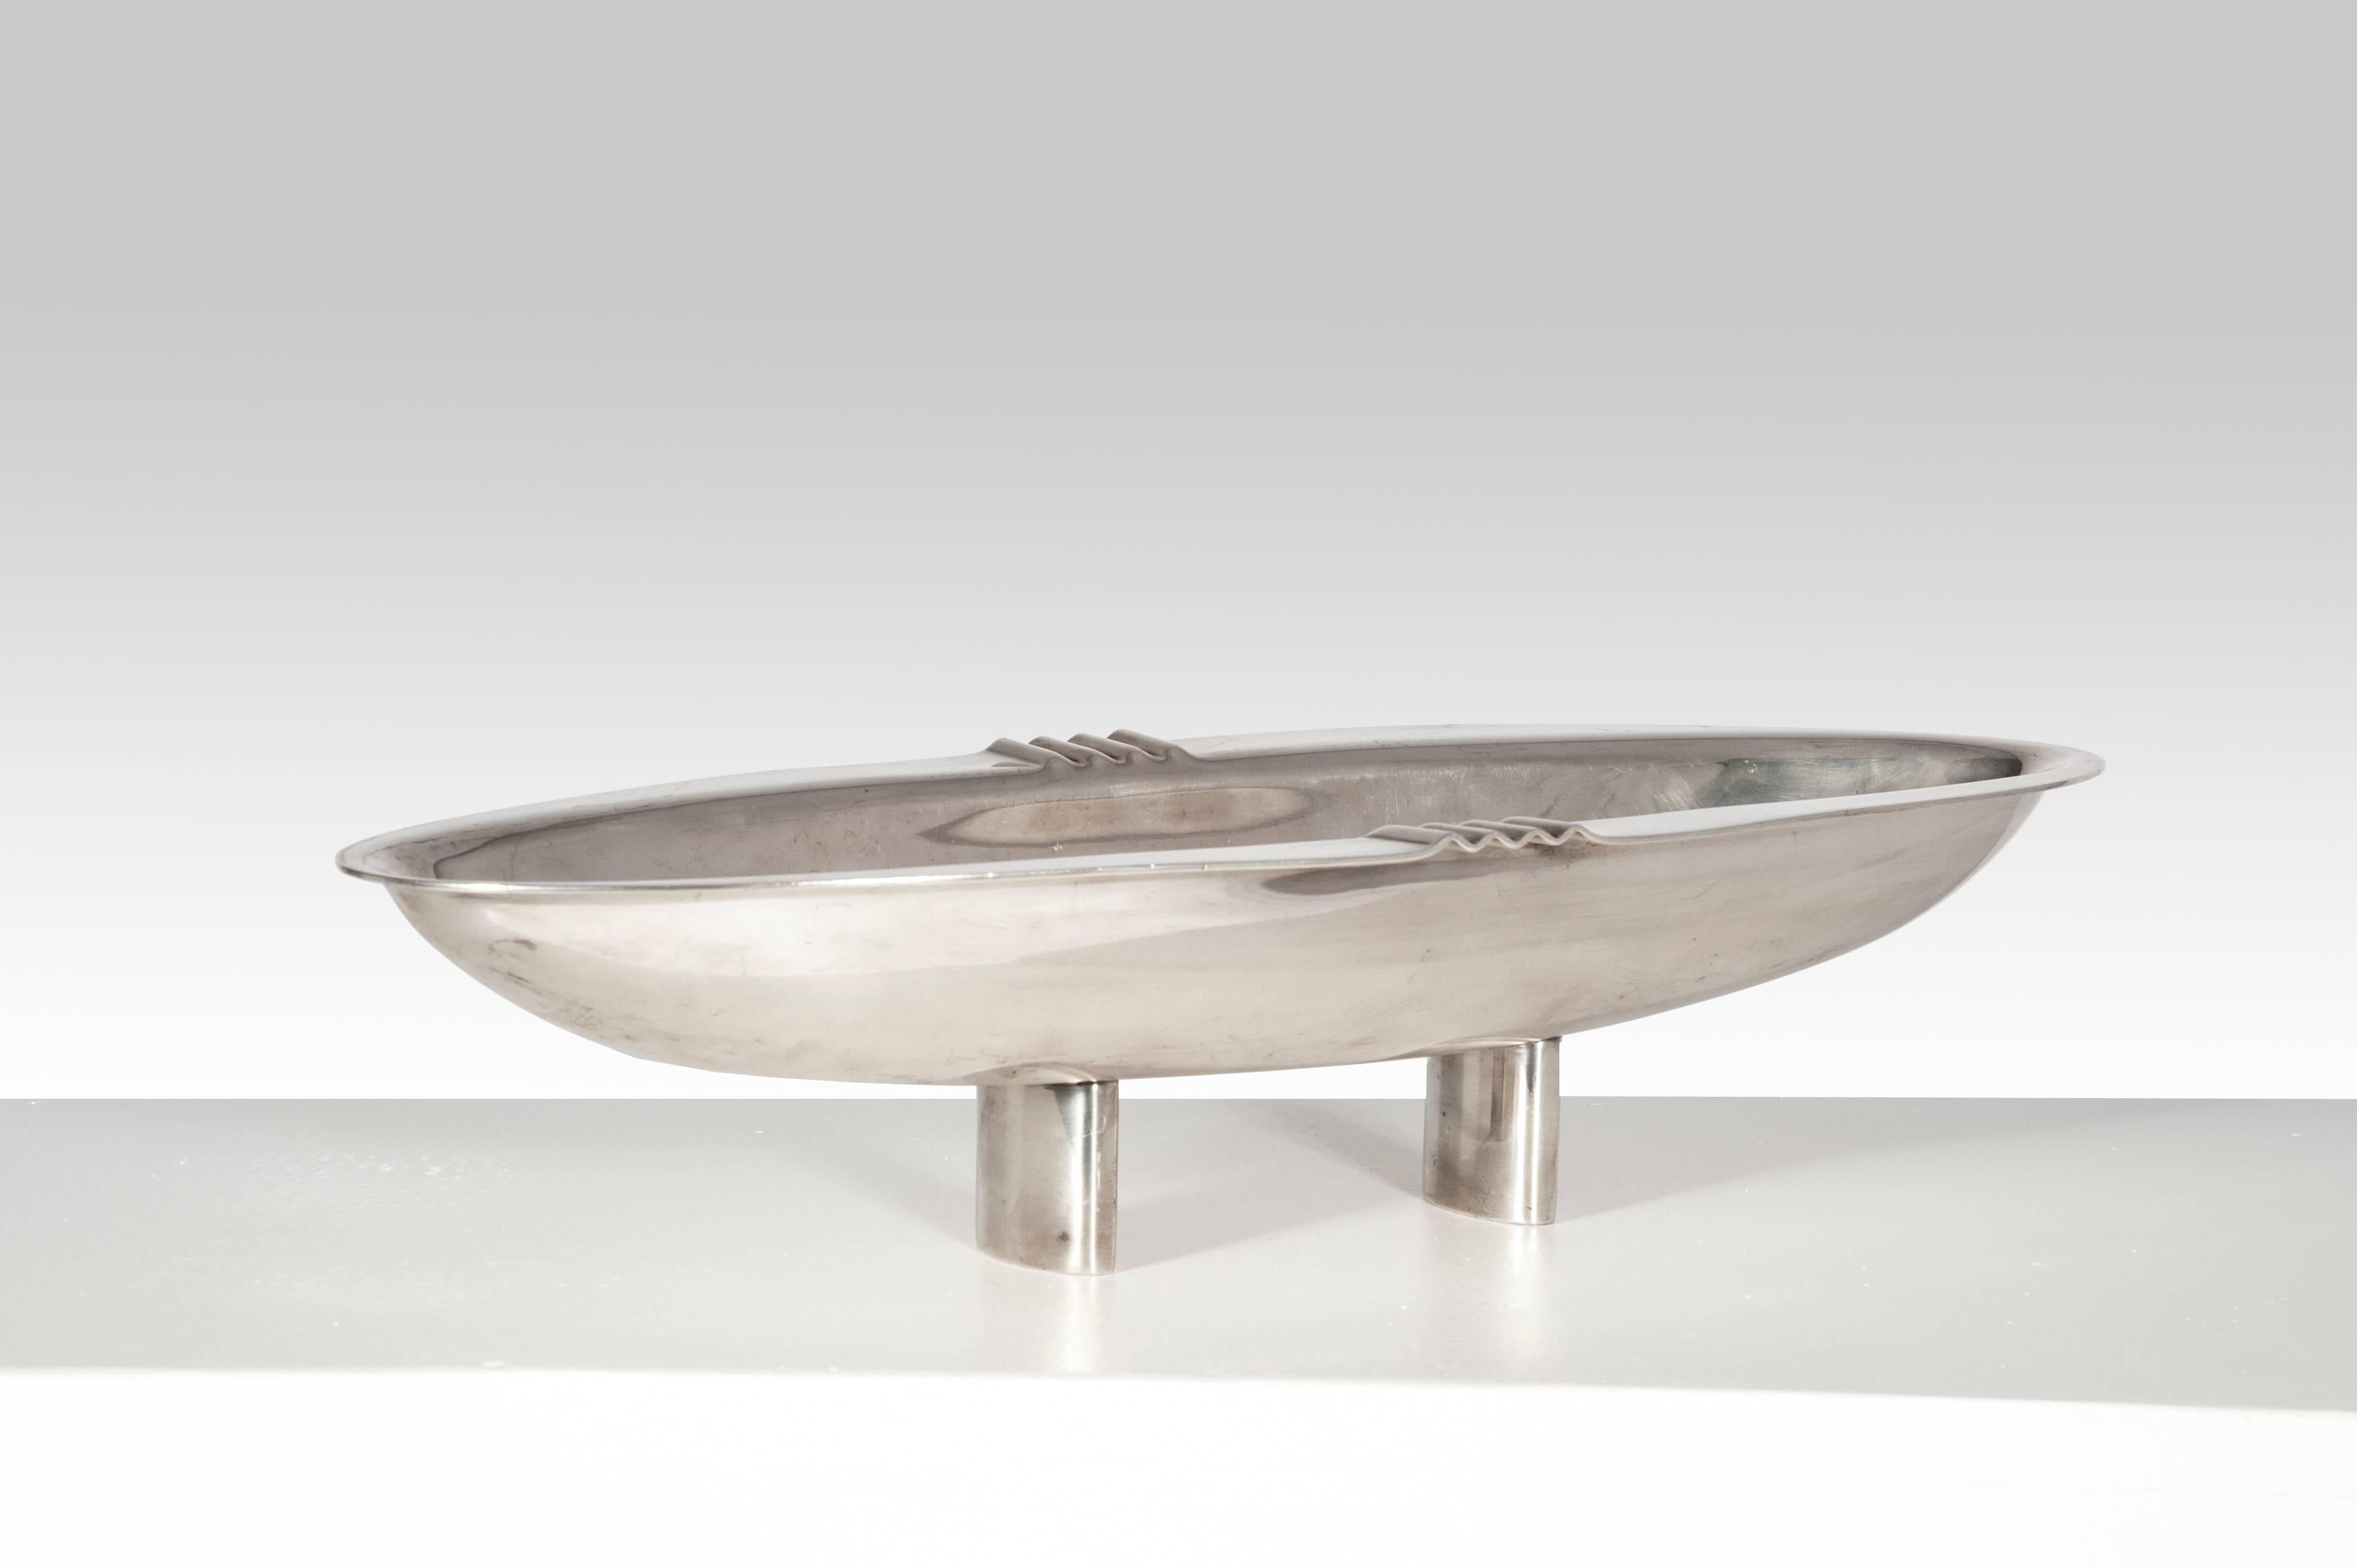 Candlestick and centrepiece by Lino Sabattini, 2 in 1, in silver plate, Italy, 1990.